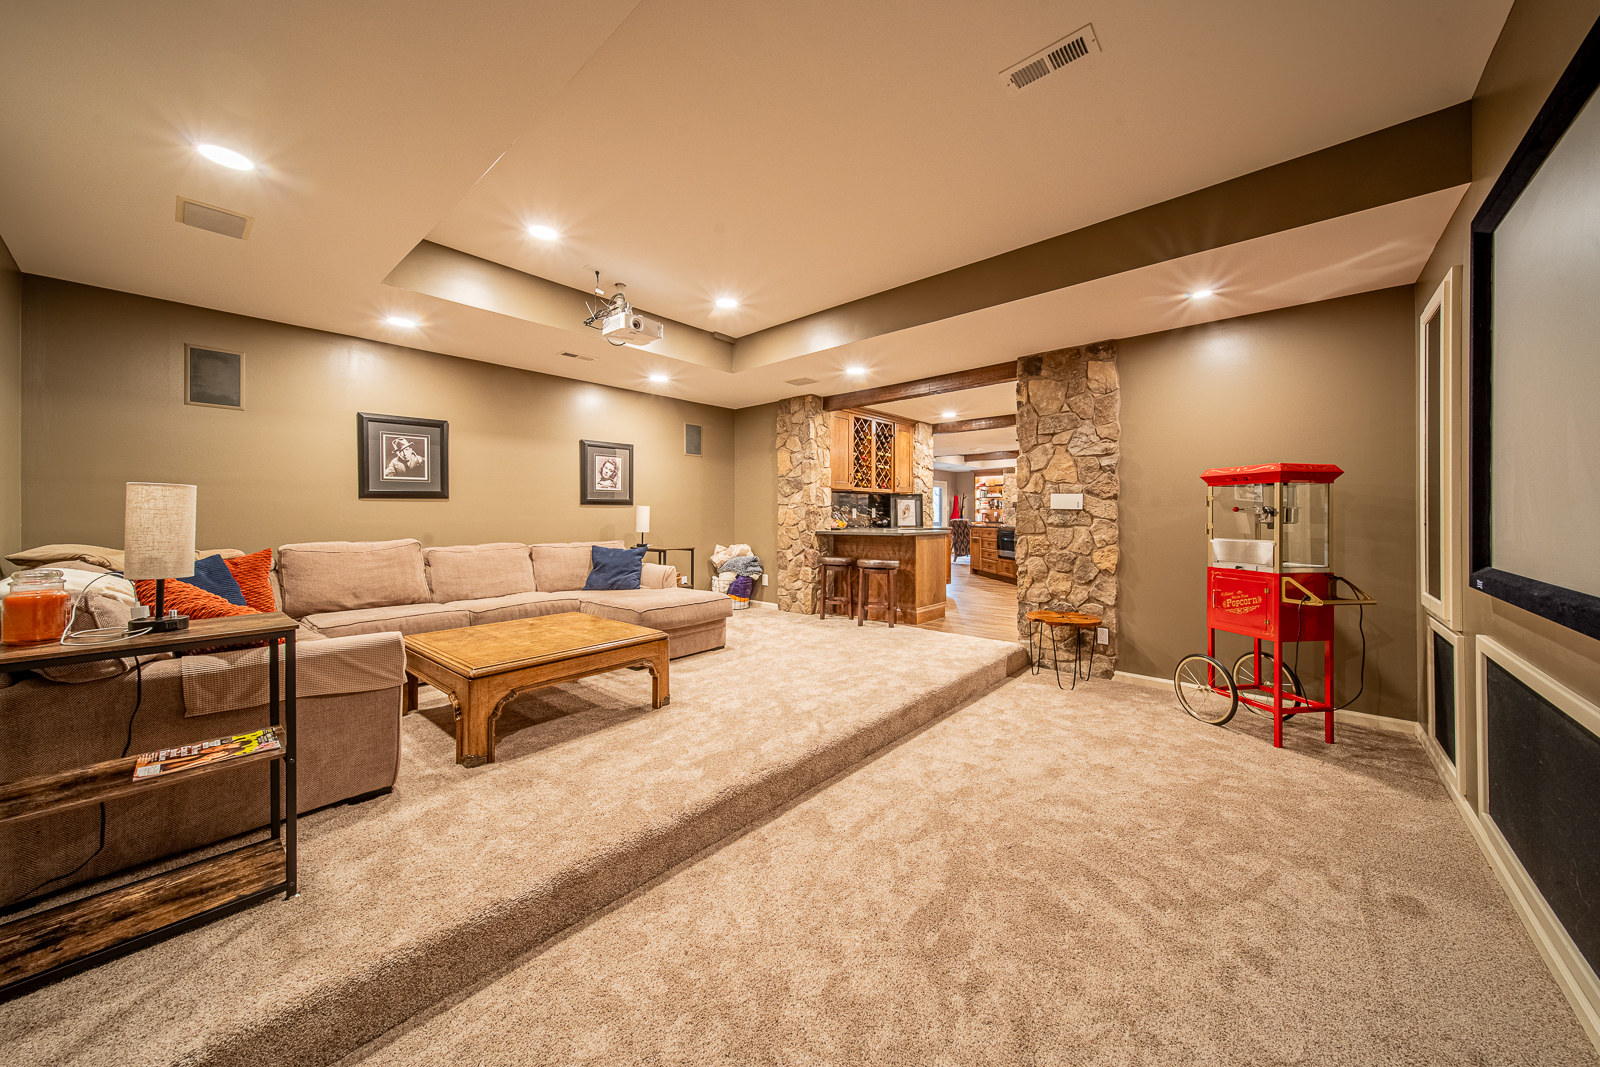 Comfortable and stylish living room area in Lafayette's Ripple Creek Drive basement remodel.